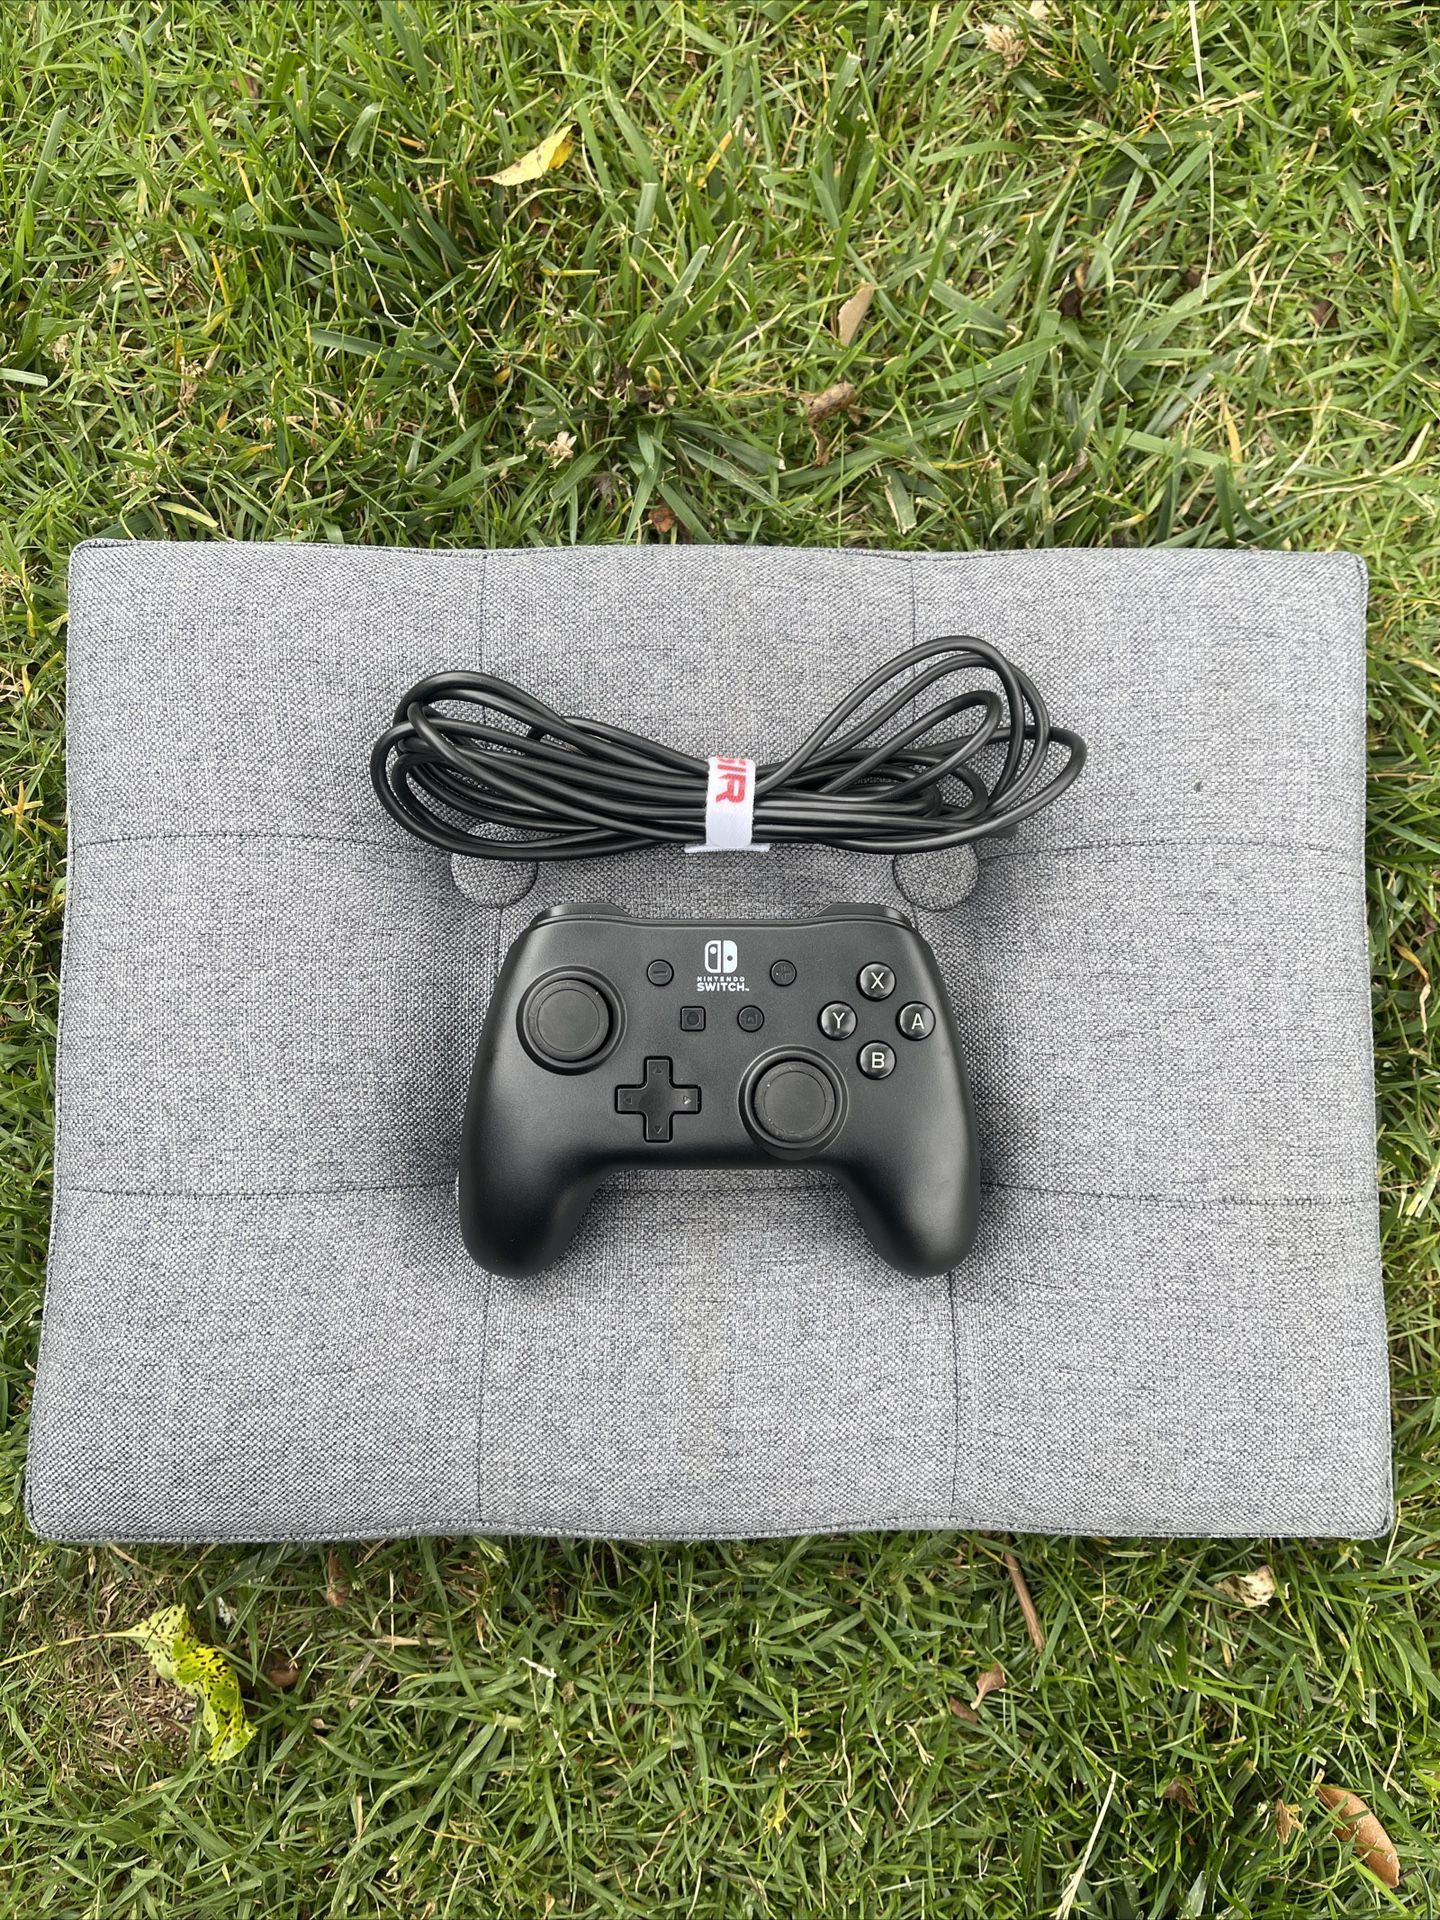 Nintendo Switch Black Wired Controller